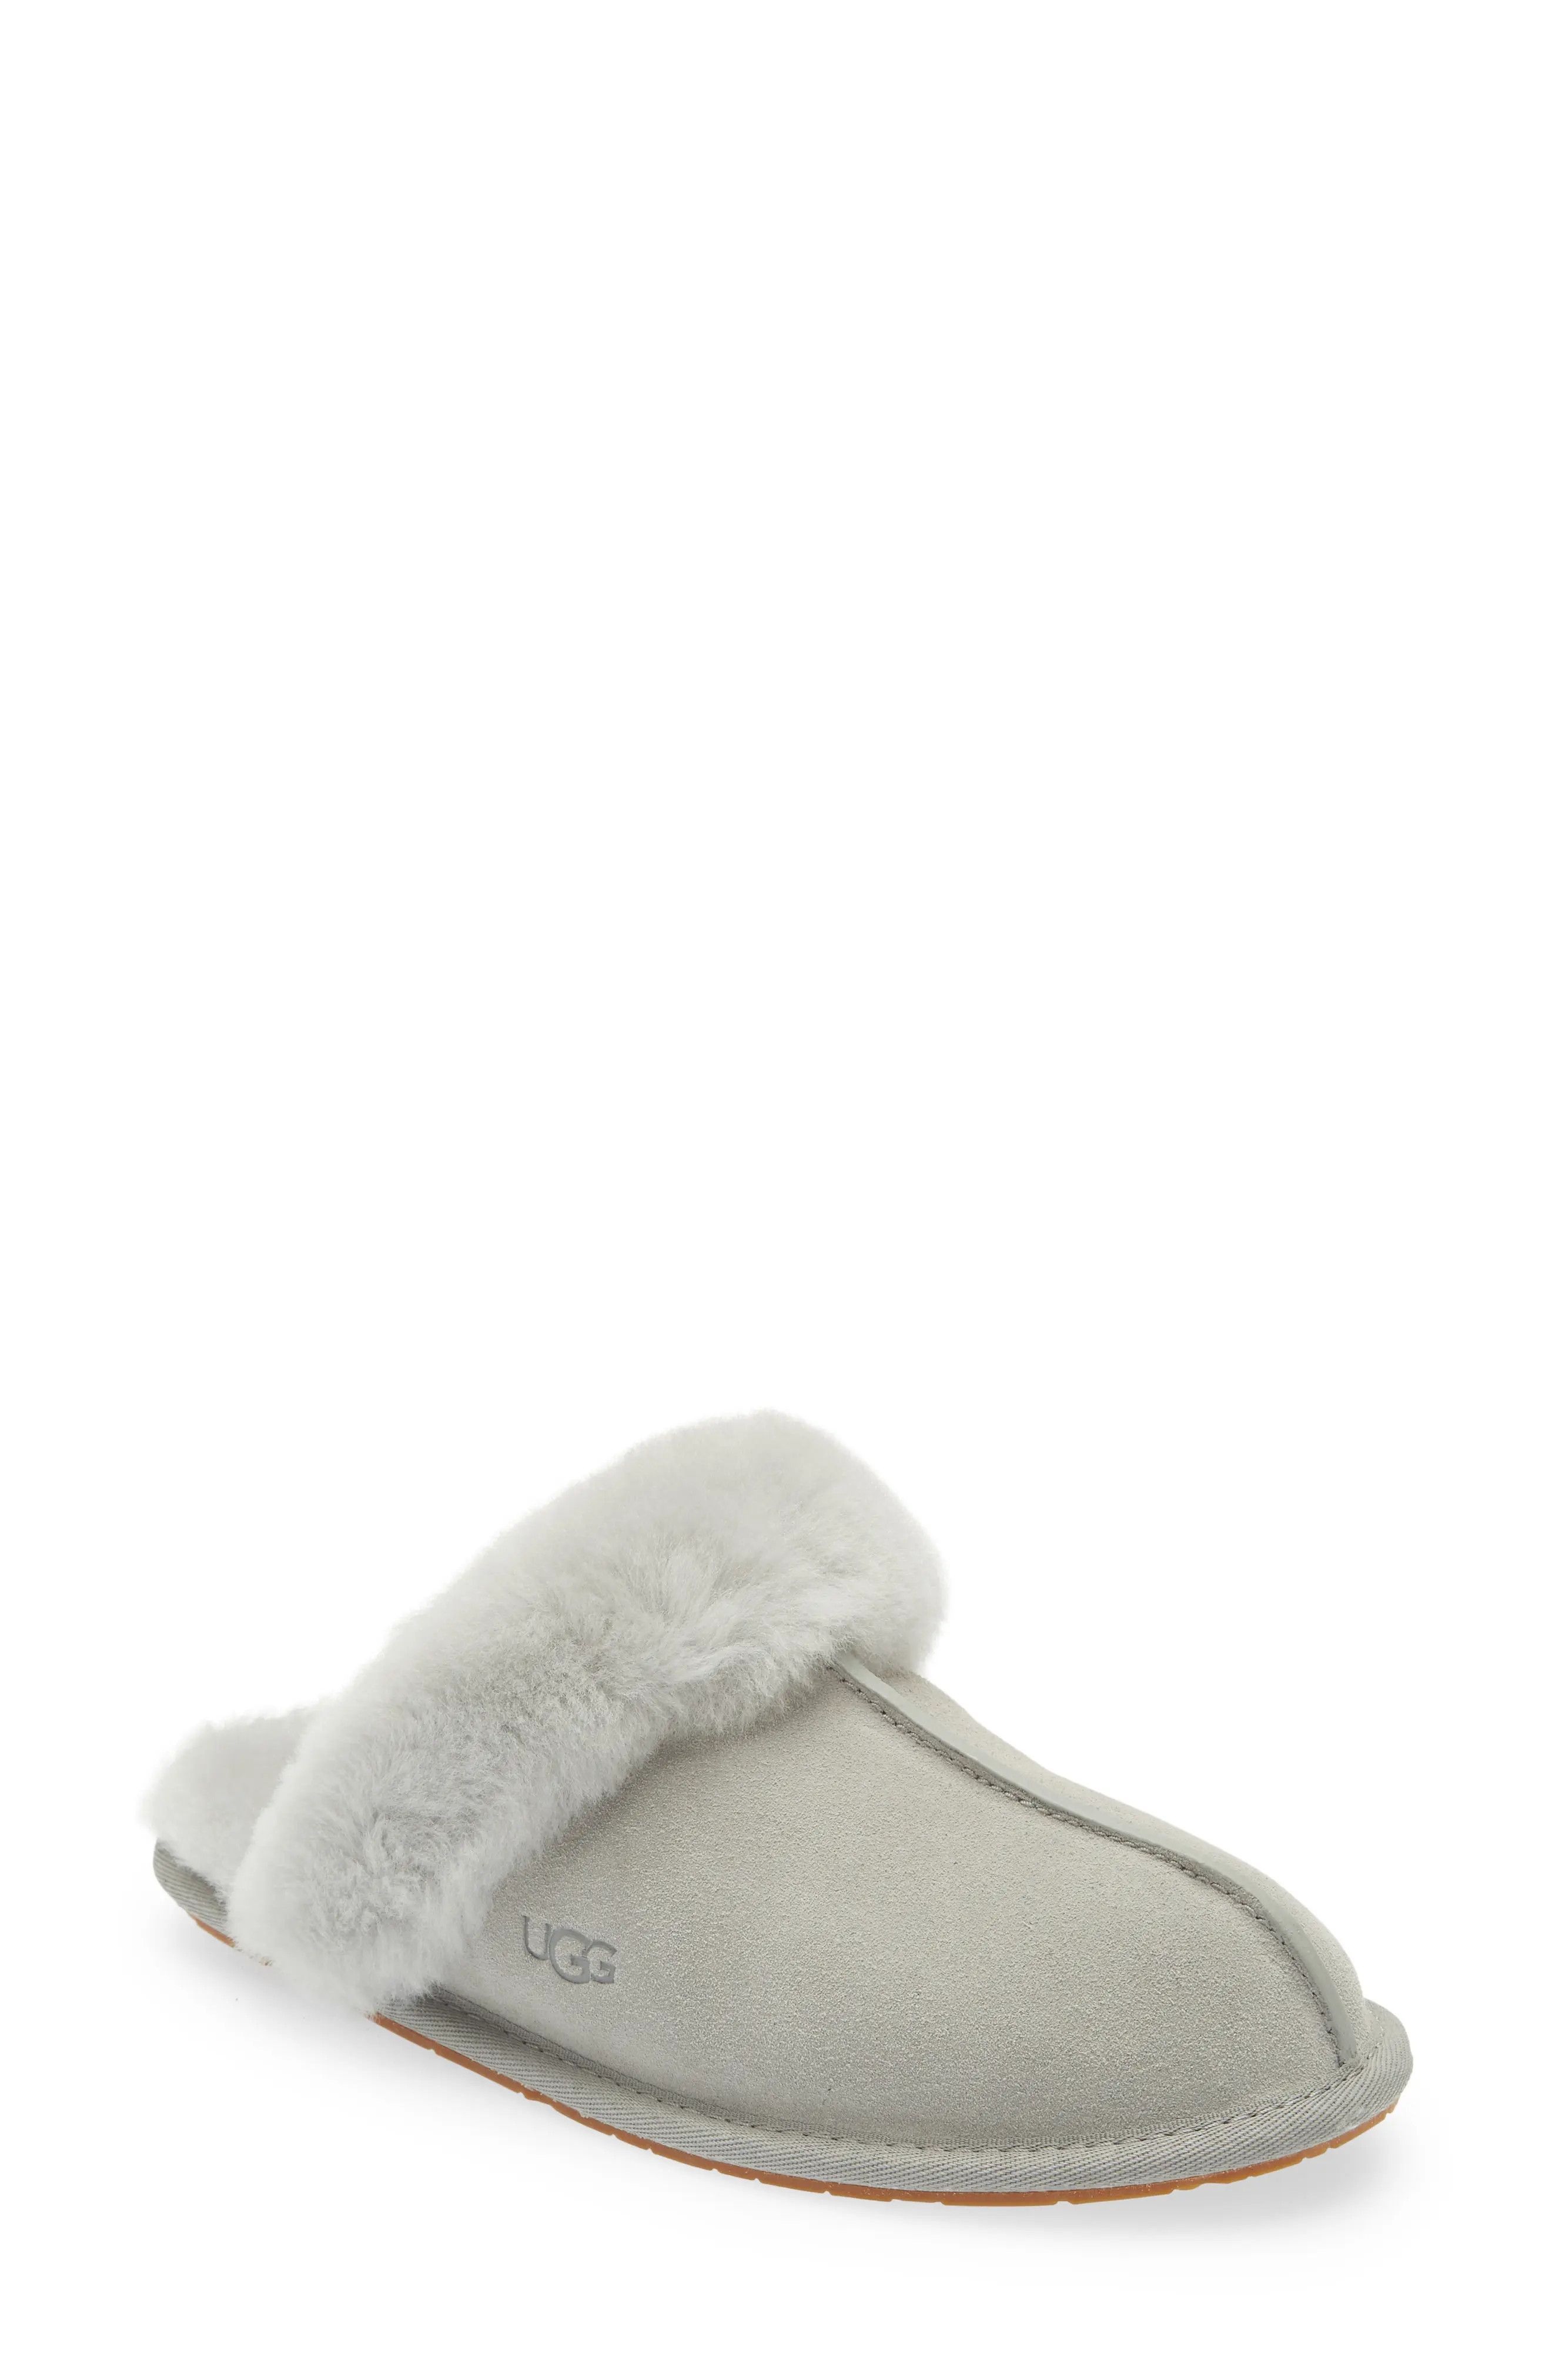 UGG(R) Scuffette II Slipper in Cobble at Nordstrom, Size 6 | Nordstrom